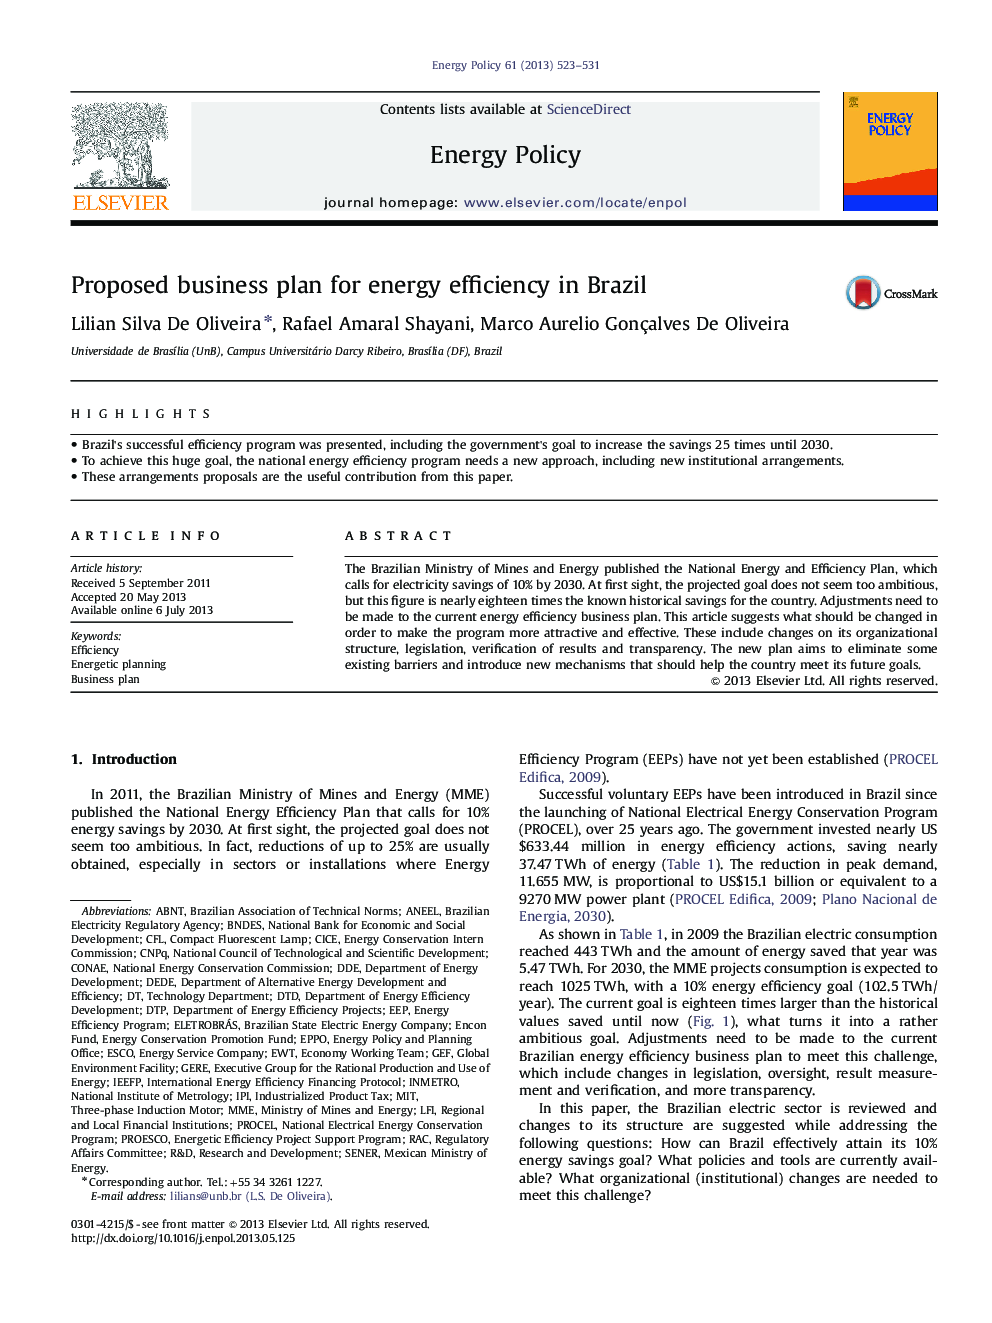 Proposed business plan for energy efficiency in Brazil